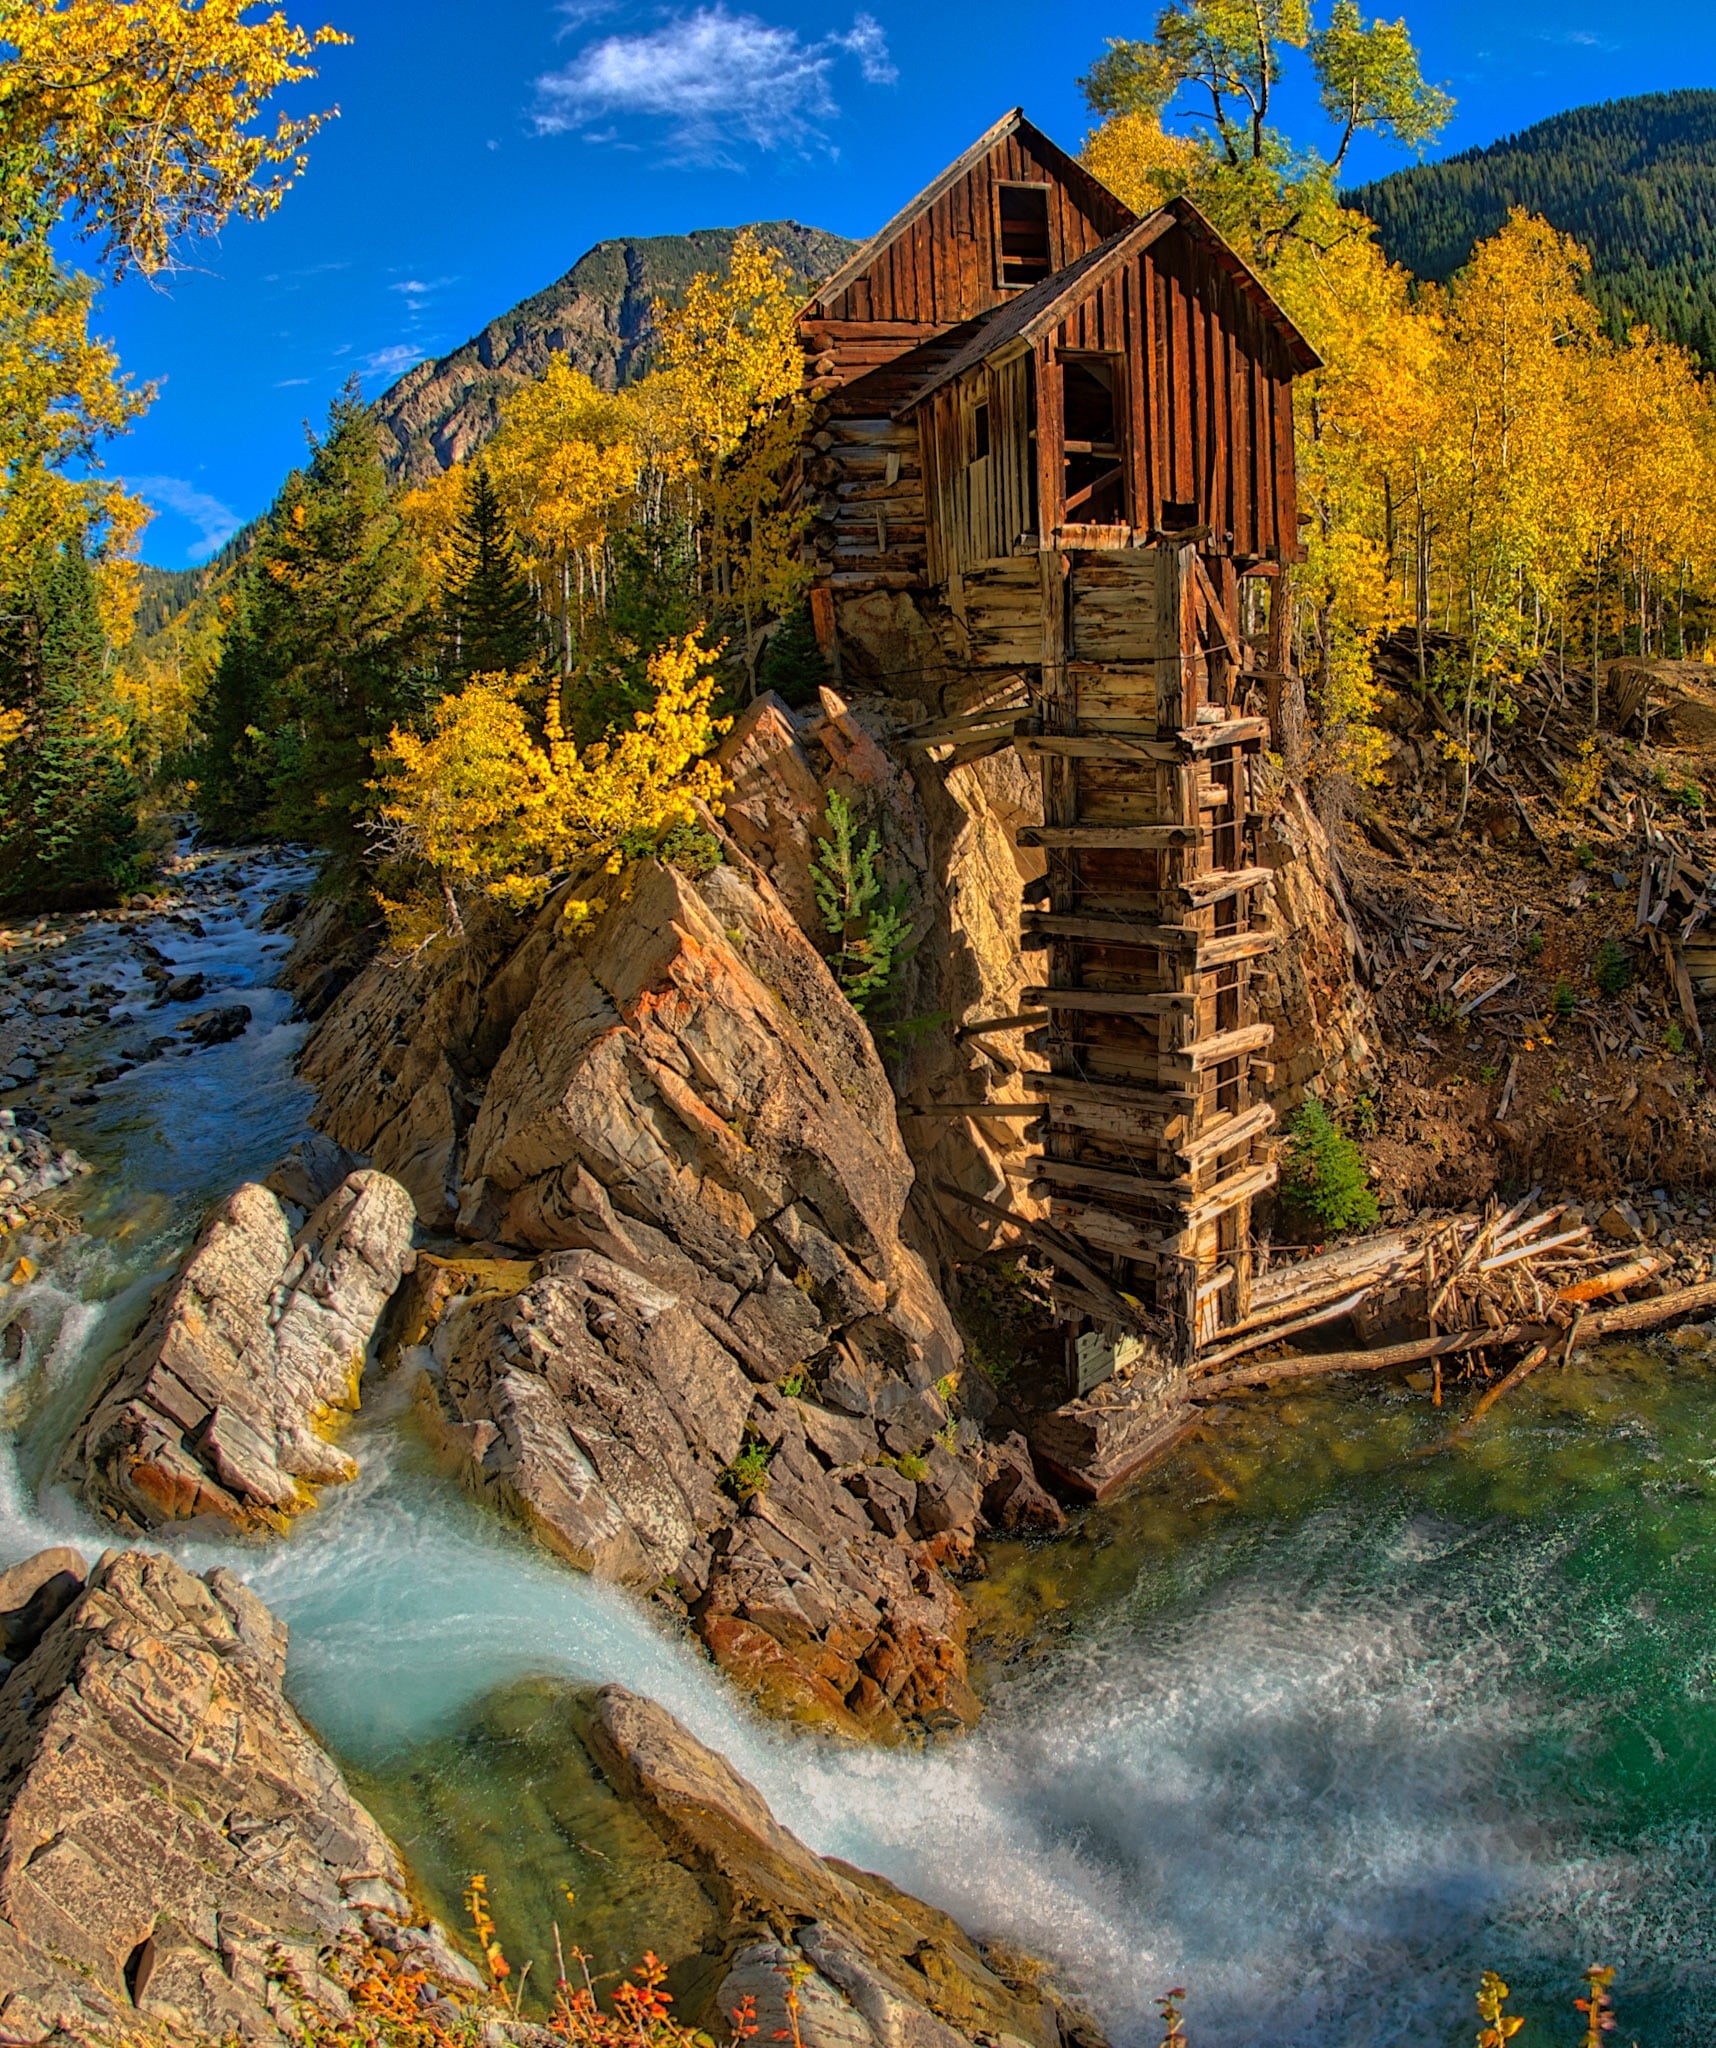 A view of the old Crystal Powerhouse along the Crystal River near Marble, Colorado.